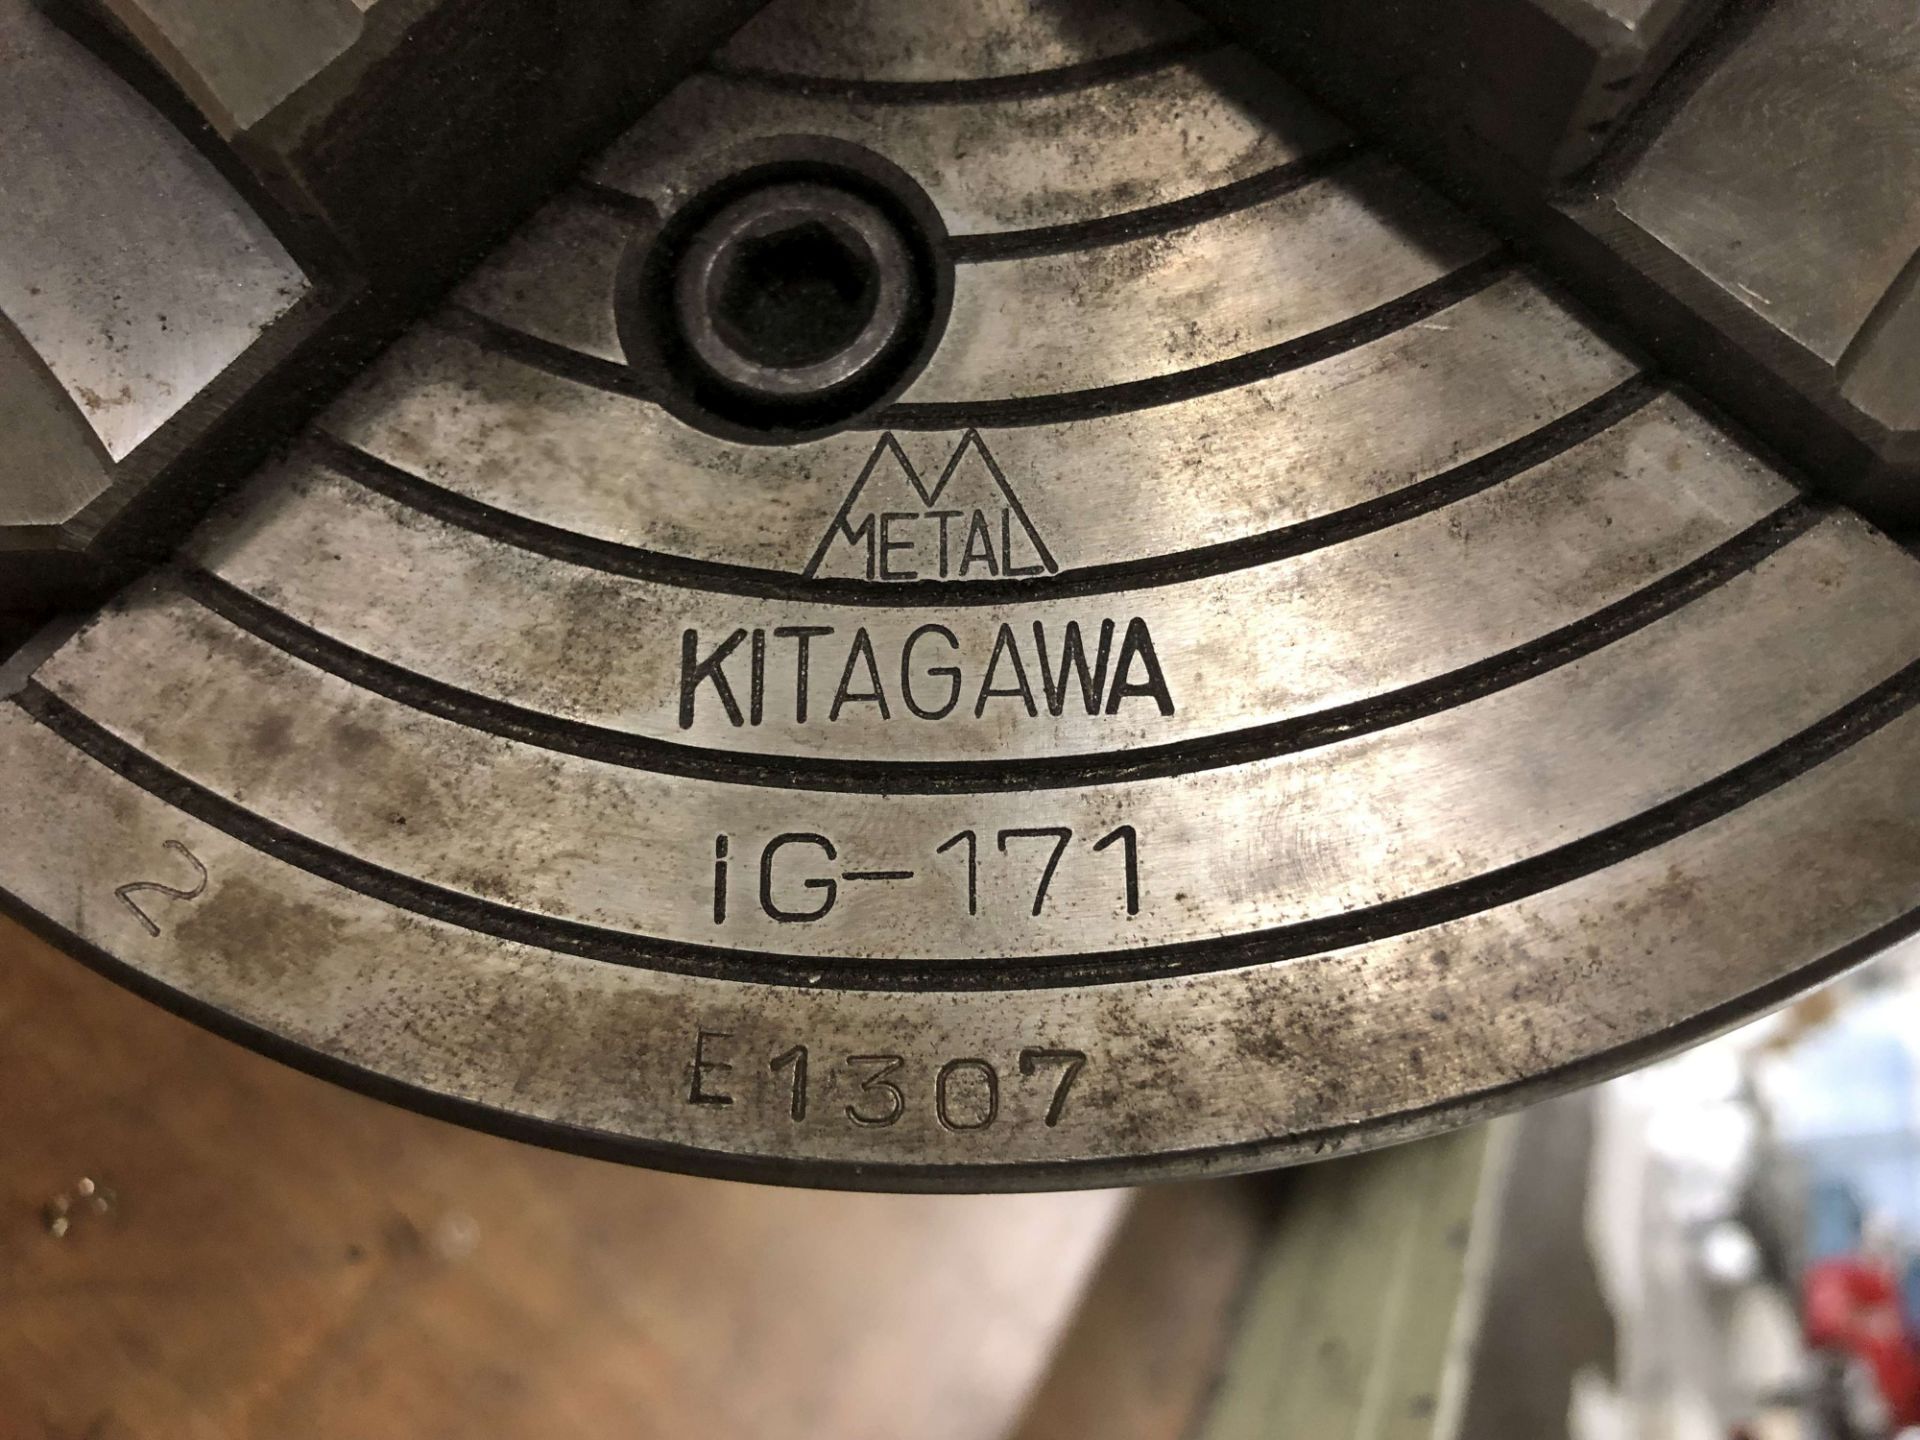 Kitagawa 8" 4-Jaw Chuck, Model IG-171 [Located @ 1700 Business Center Drive, Duarte, CA 91010] - Image 2 of 3